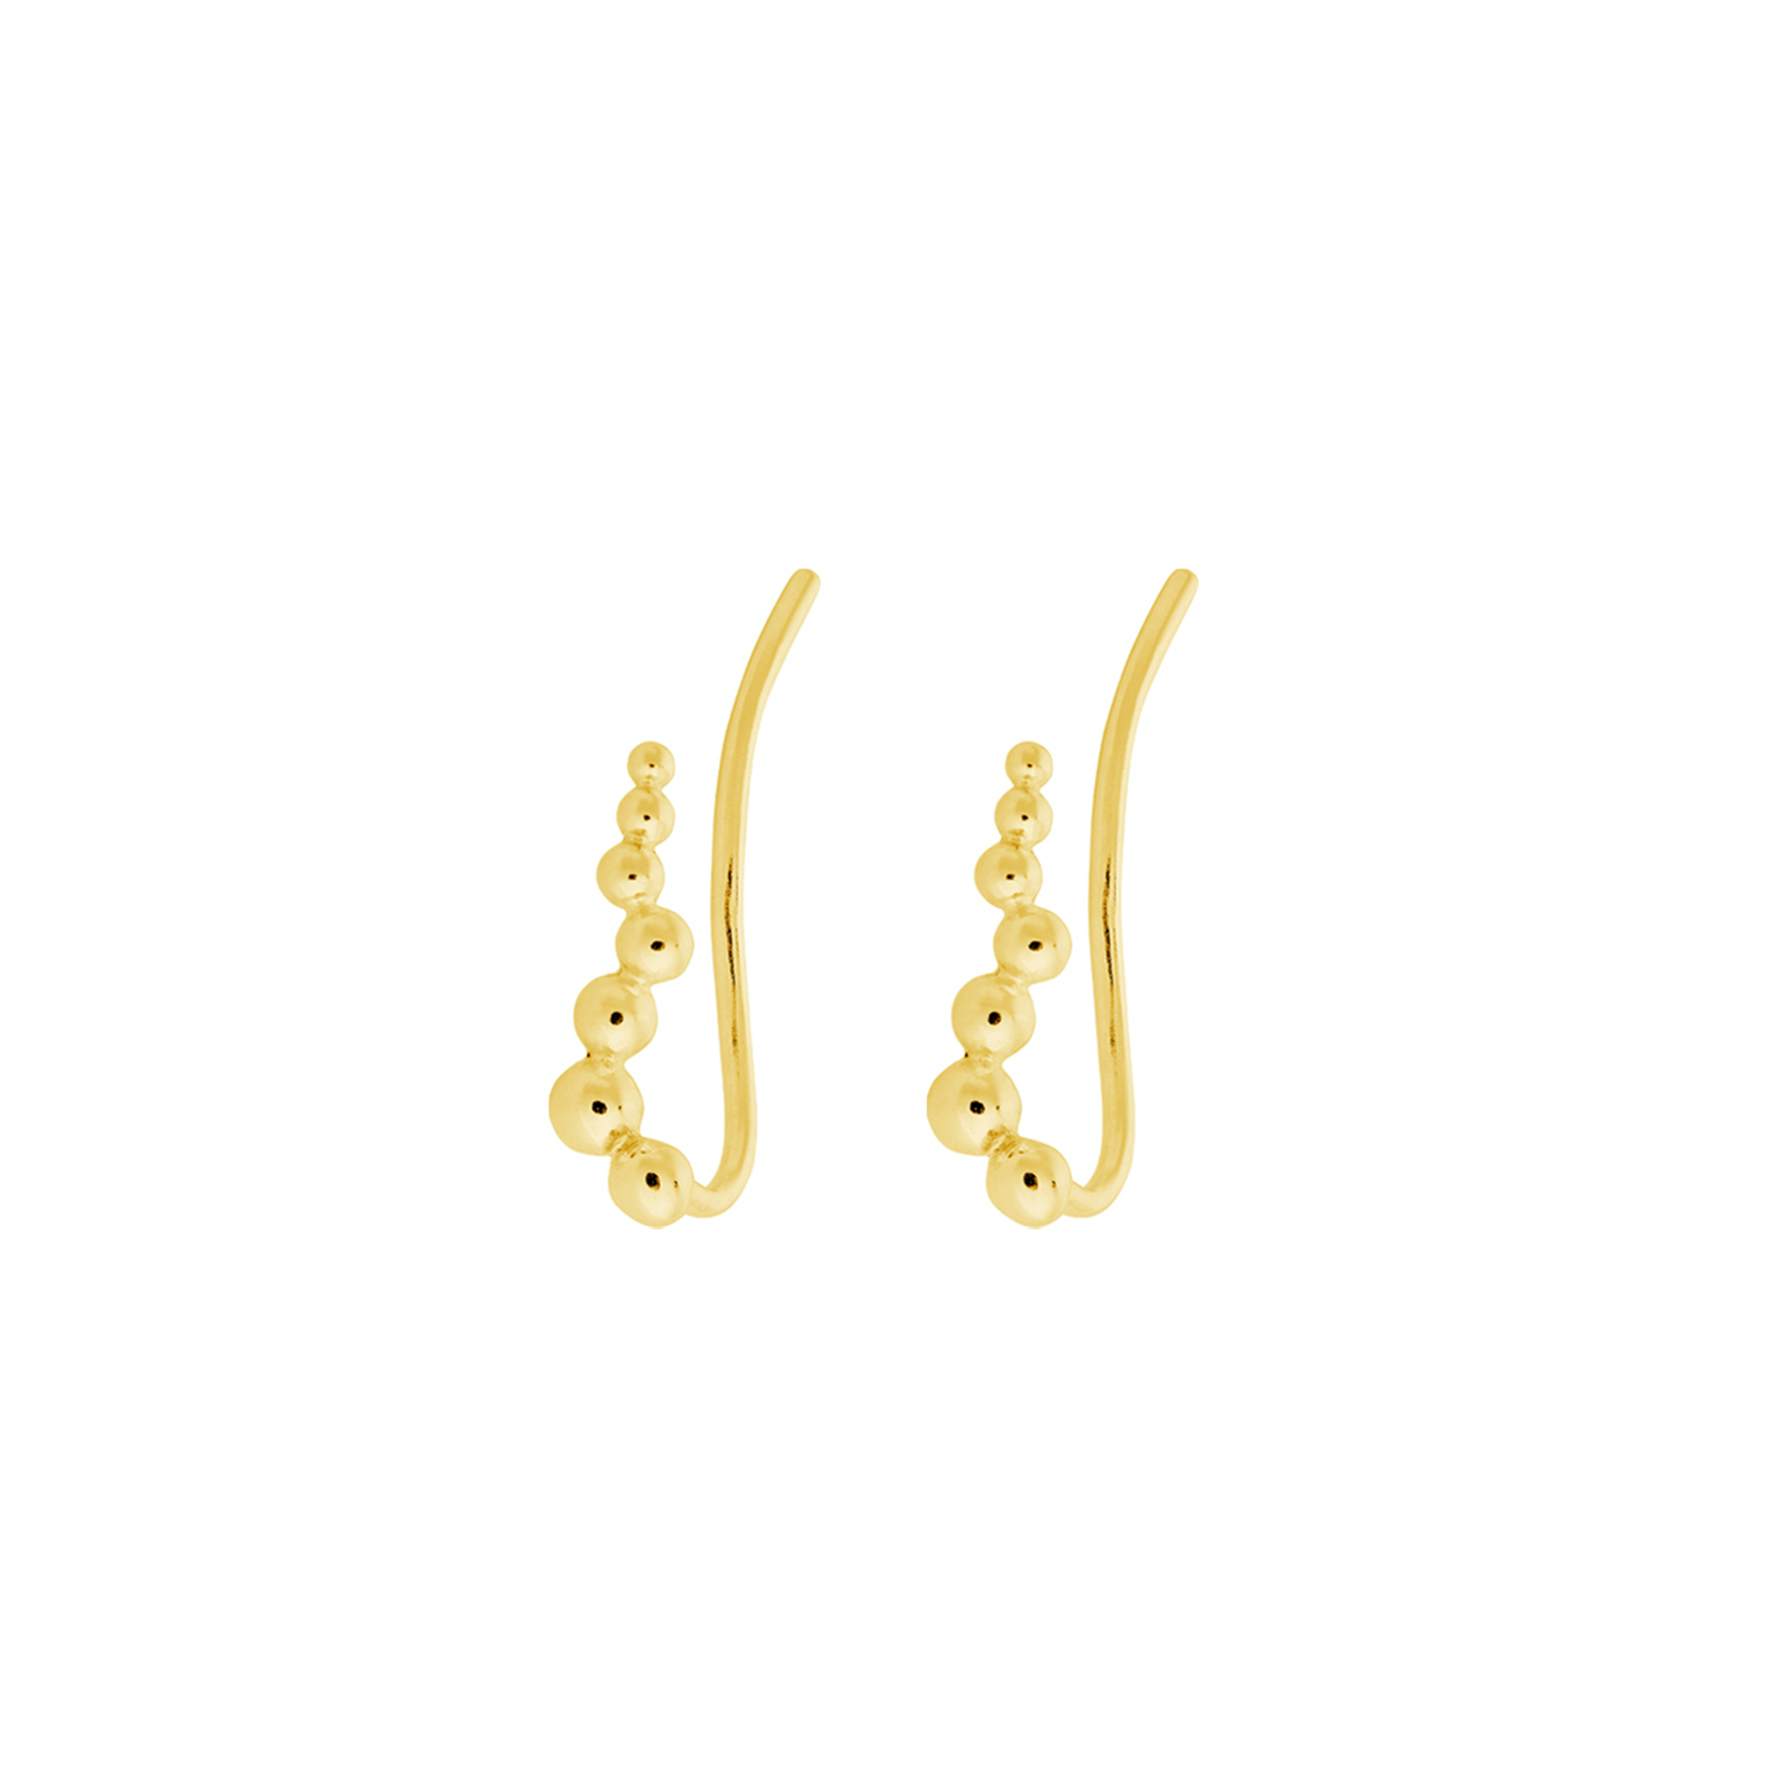 Glint Earclimber from Pernille Corydon in Goldplated-Silver Sterling 925